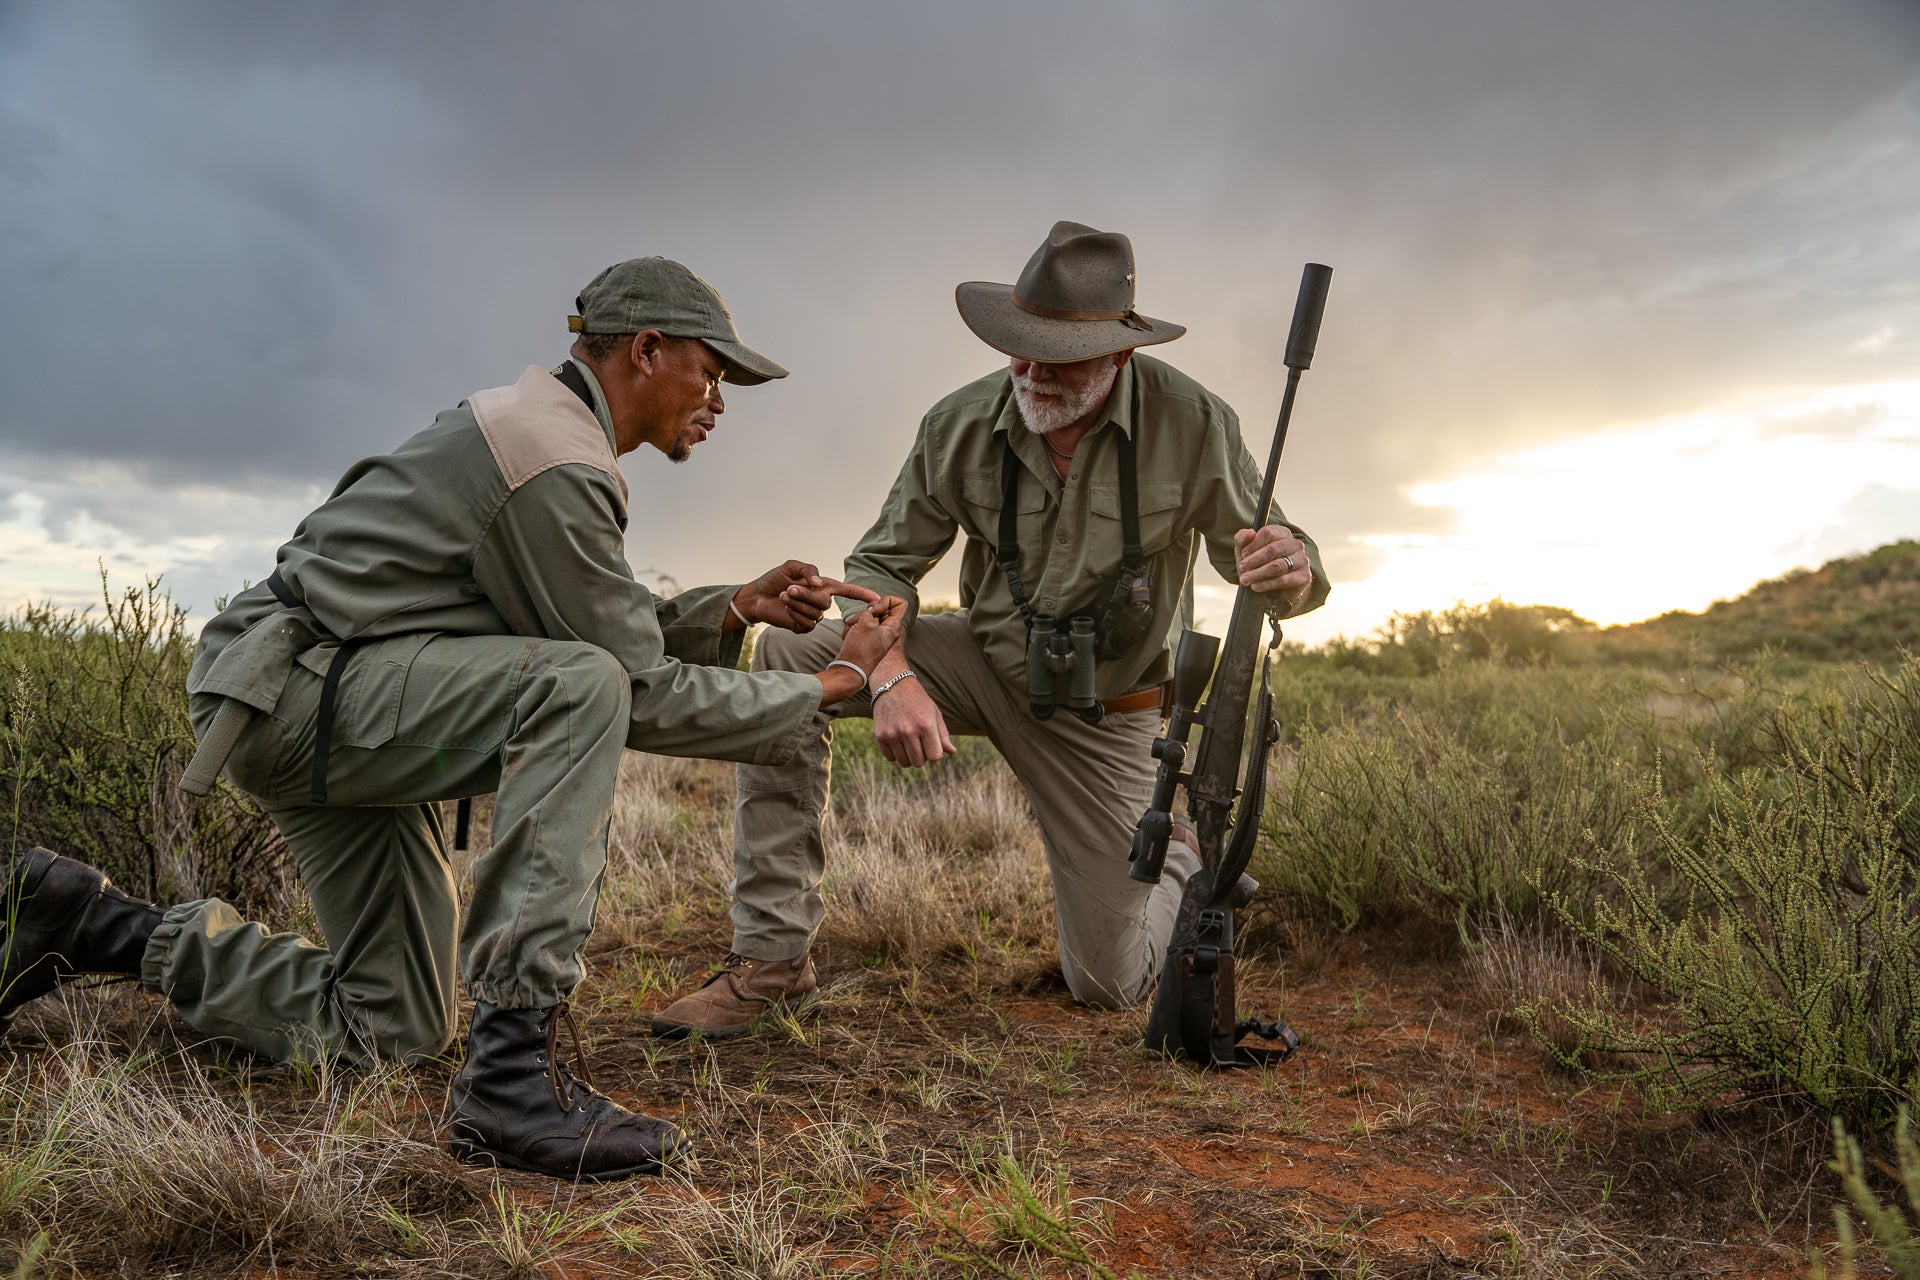 An African tracker advises a hunter who is using a suppressor on his rifle.